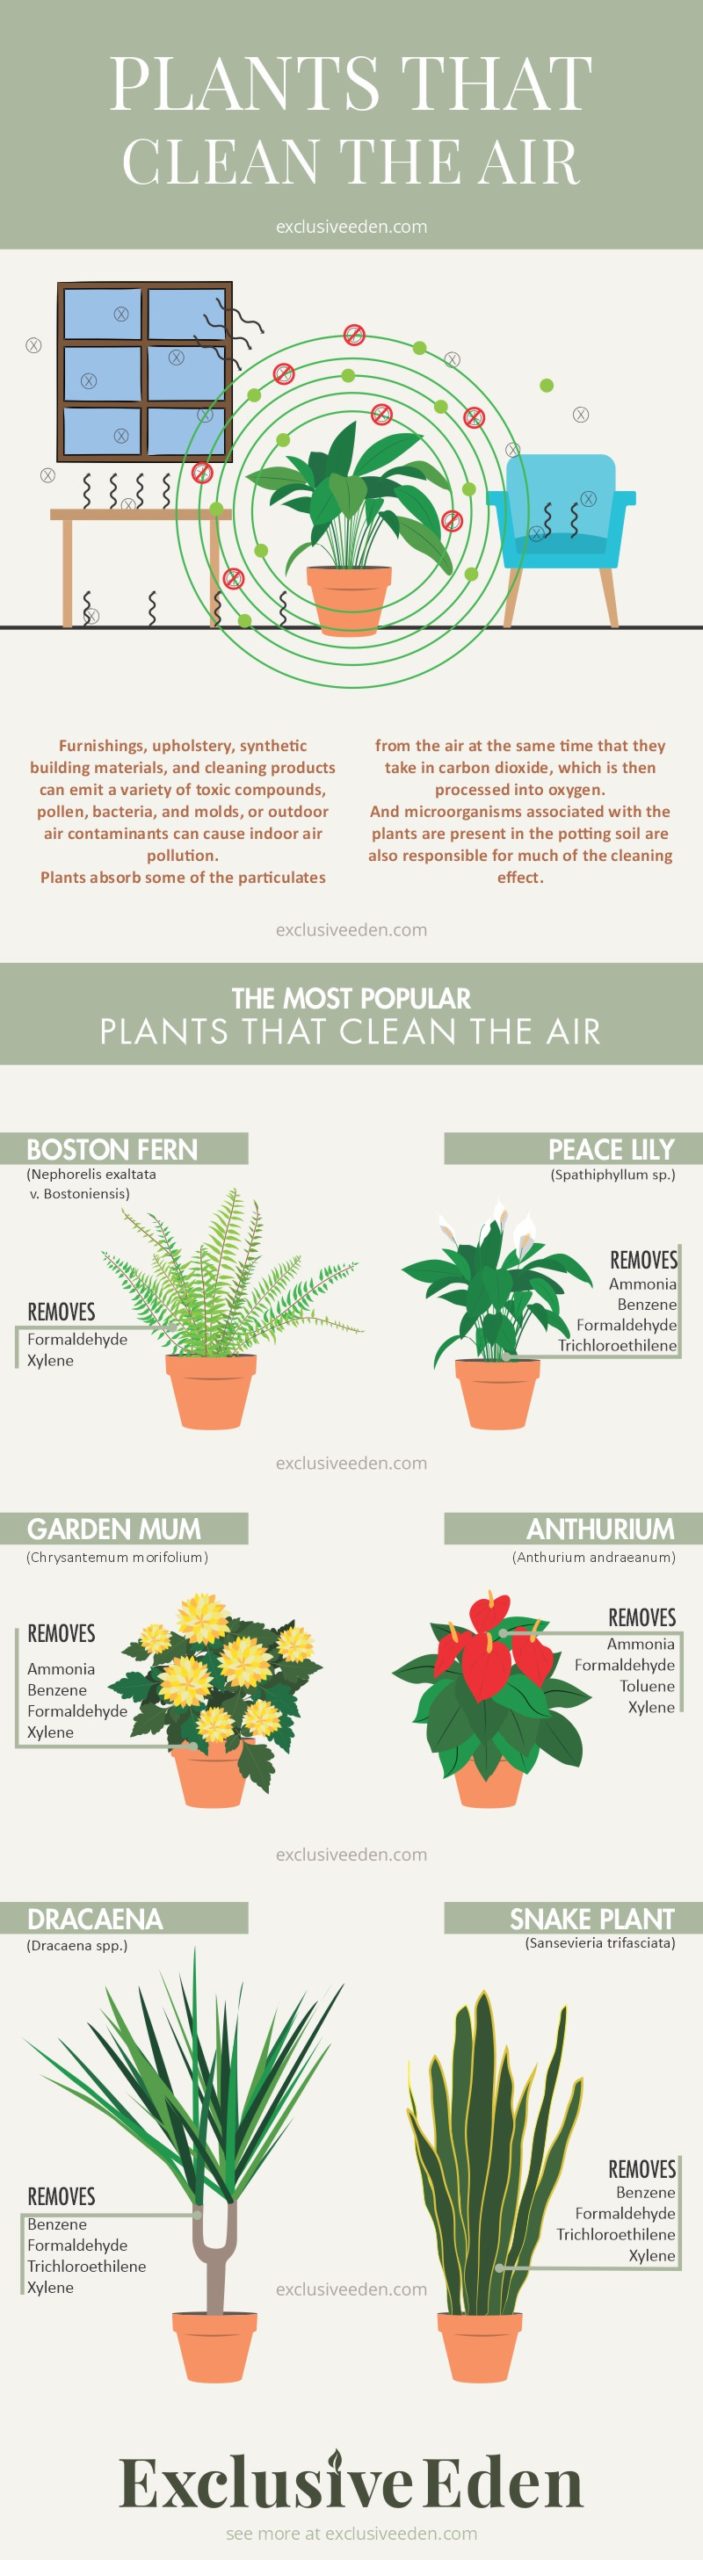 Illustrated guide to plants that help clean the air for your home.